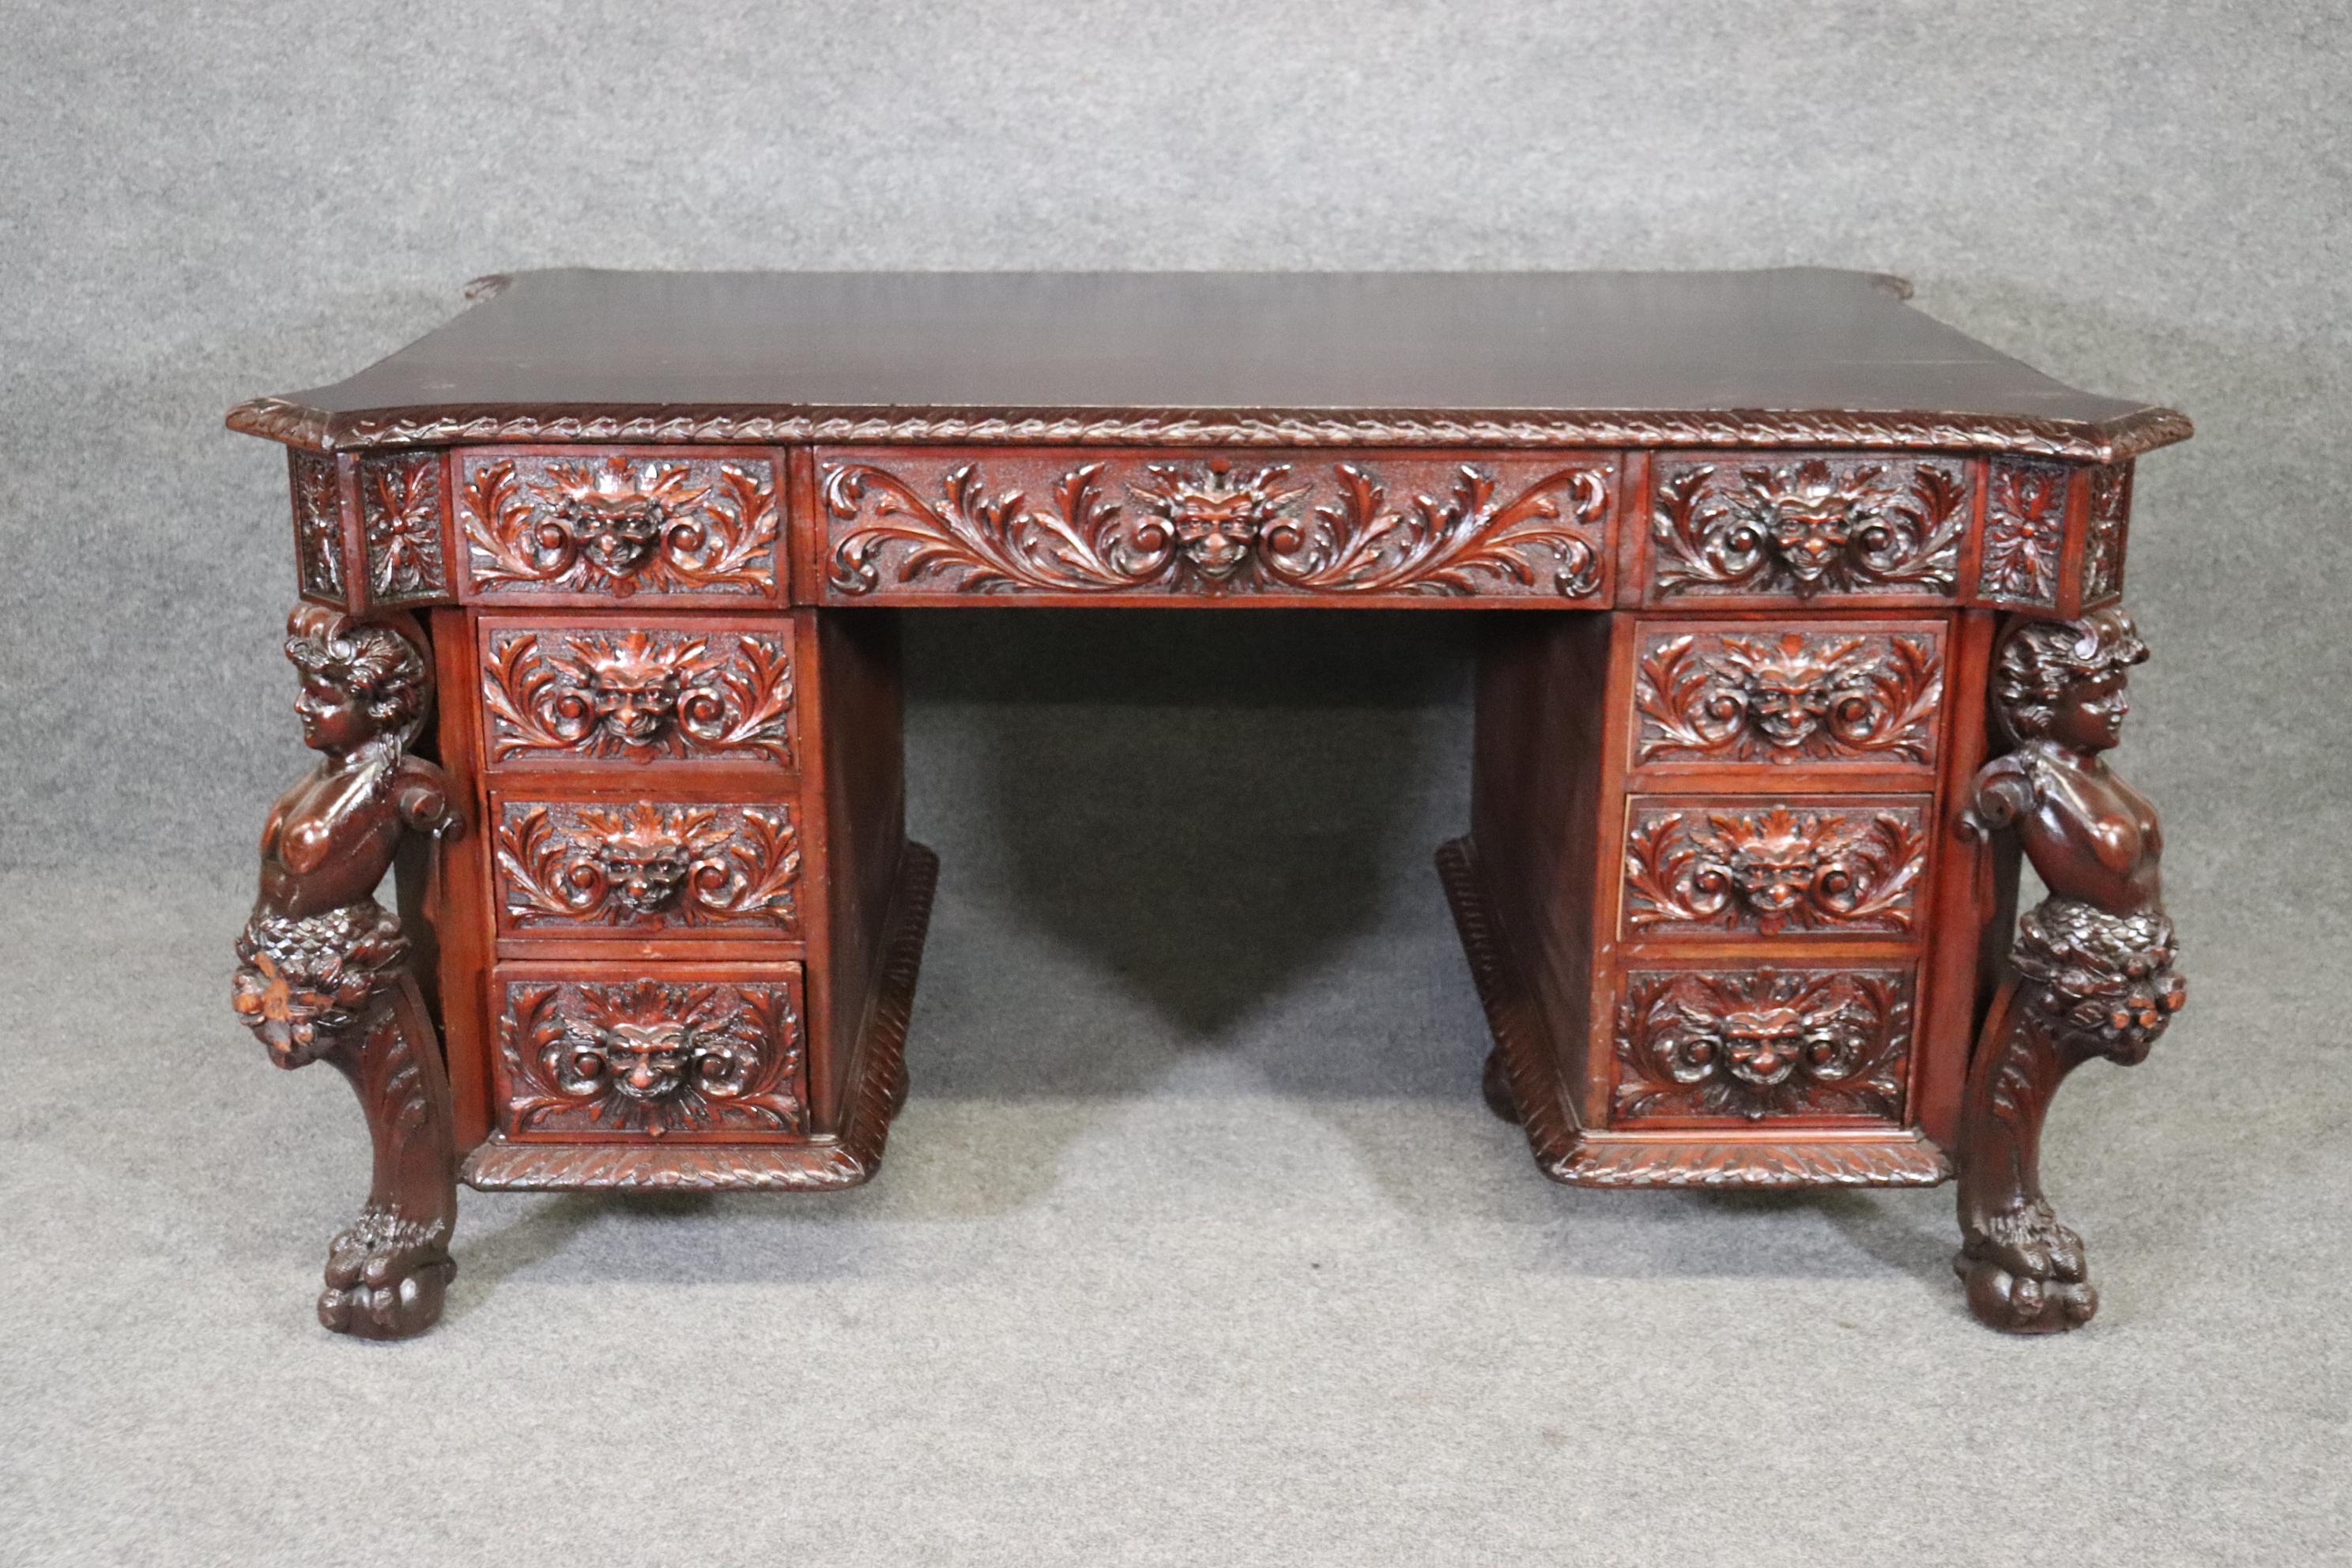 Late 19th Century Rare Figural Carved Solid Mahogany R.J. Horner Partners Executive Desk